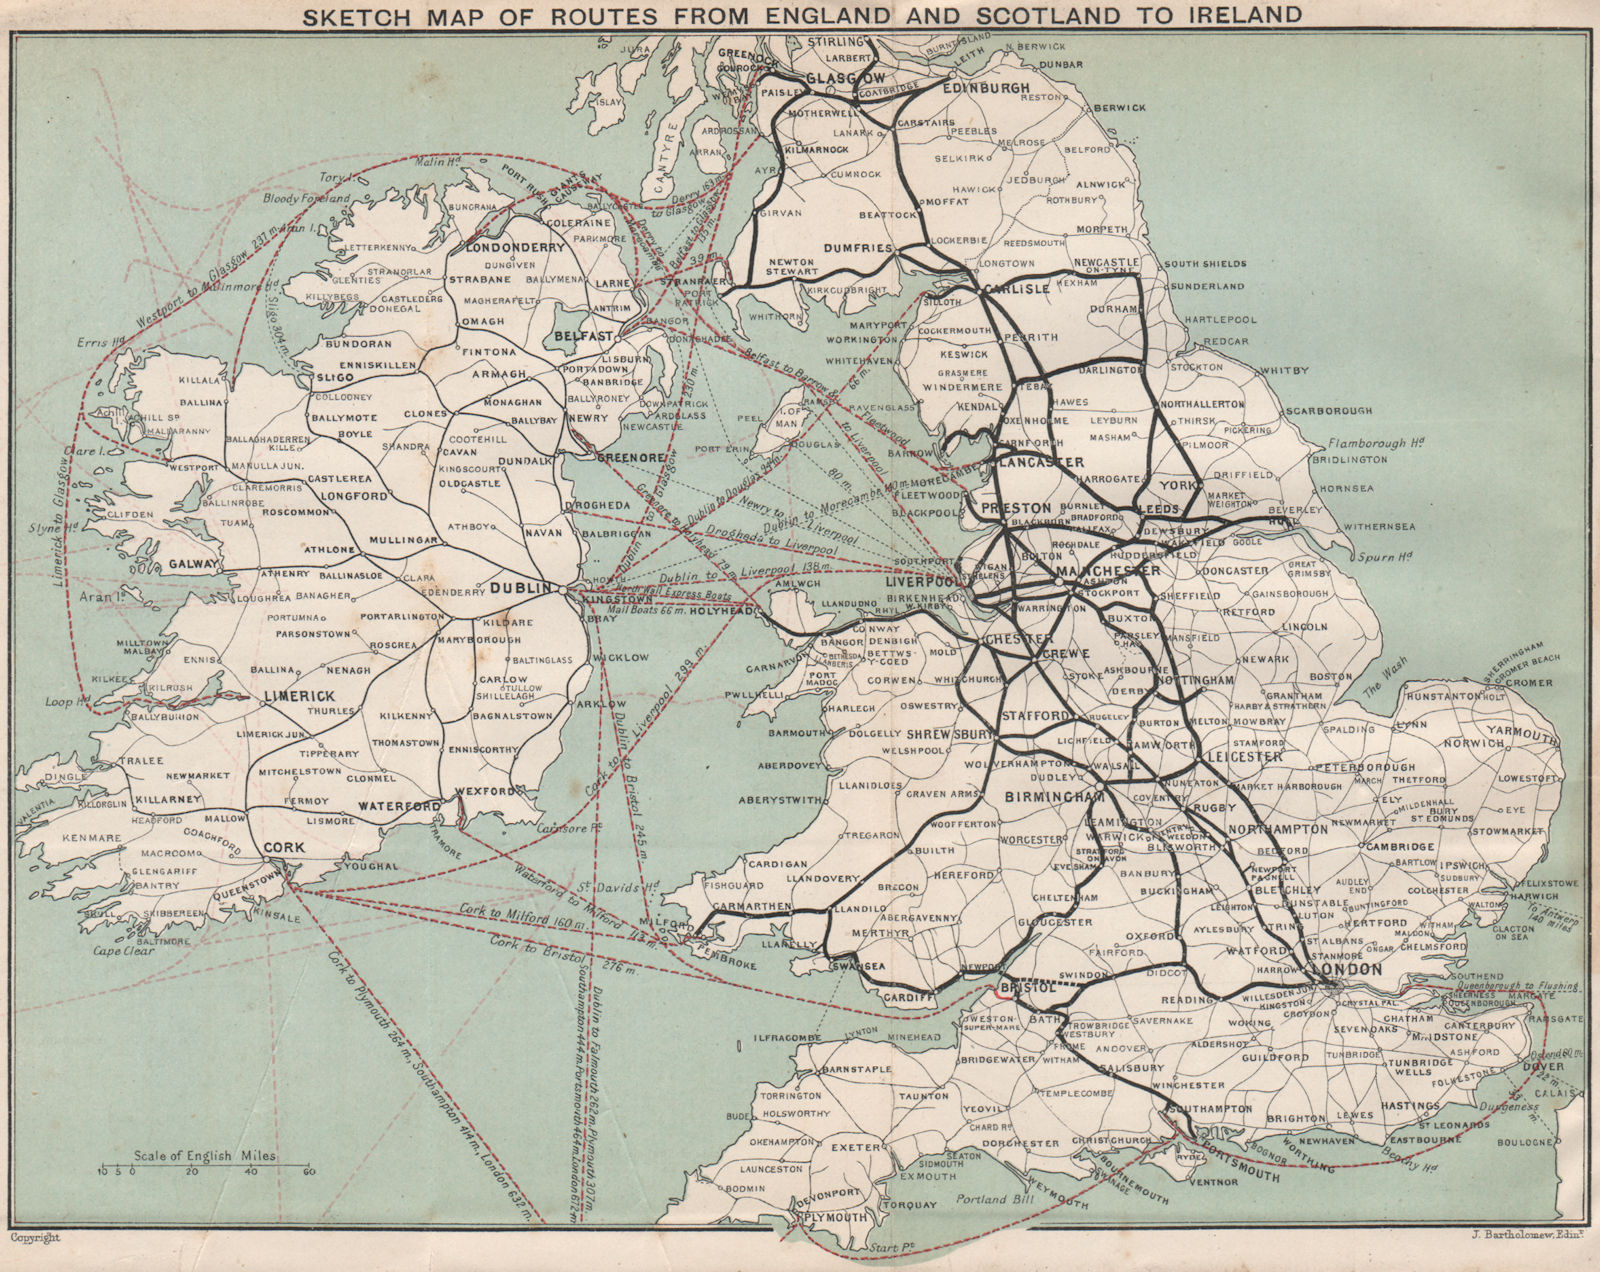 Ferry/shipping routes from England and Scotland to Ireland. BARTHOLOMEW 1901 map